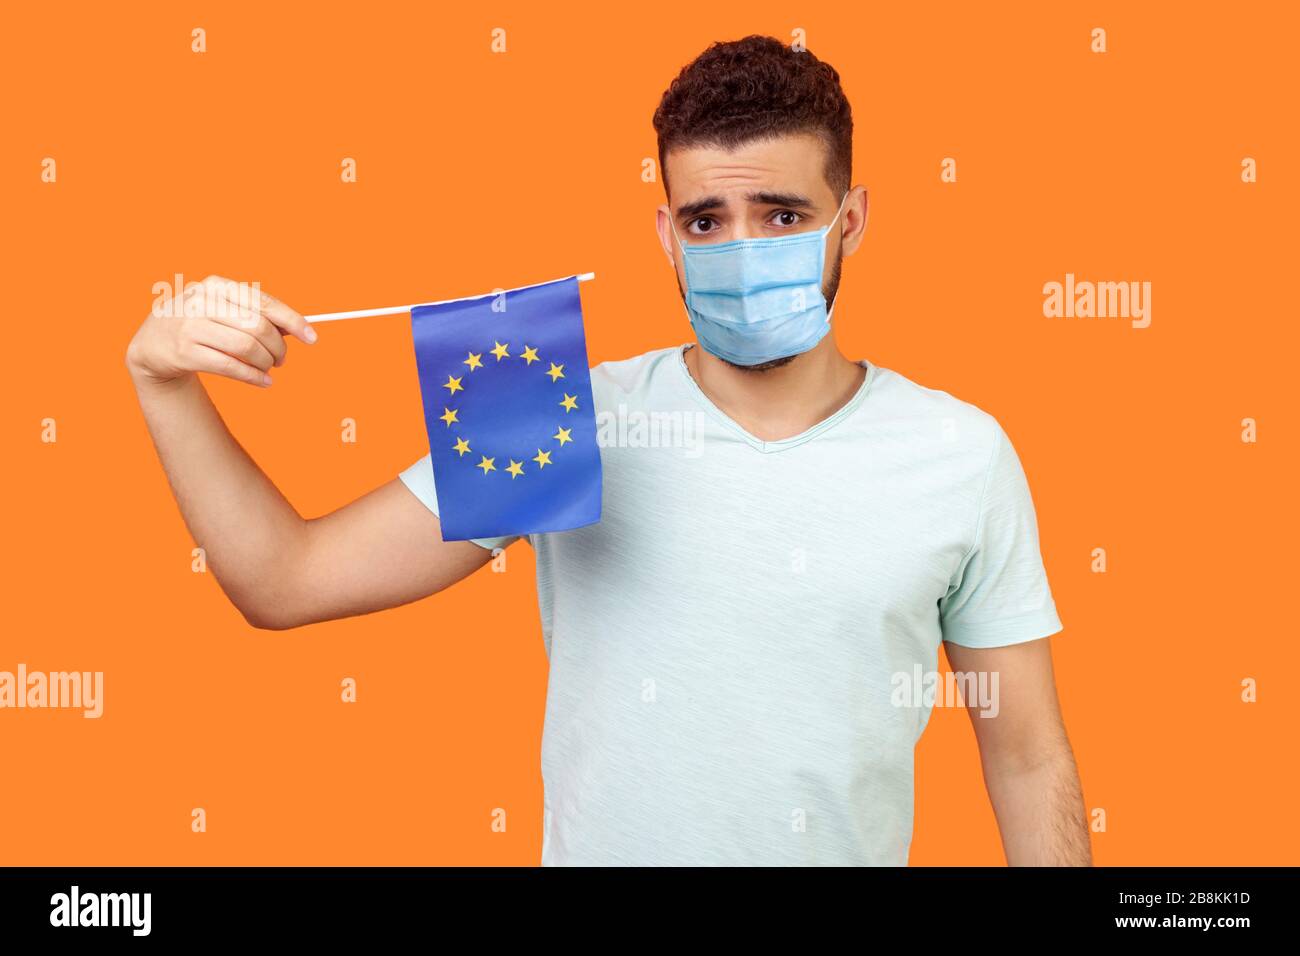 European Union flag. Portrait of upset man with medical mask in white t-shirt holding EU flag and looking at camera with disappointed sad expression. Stock Photo